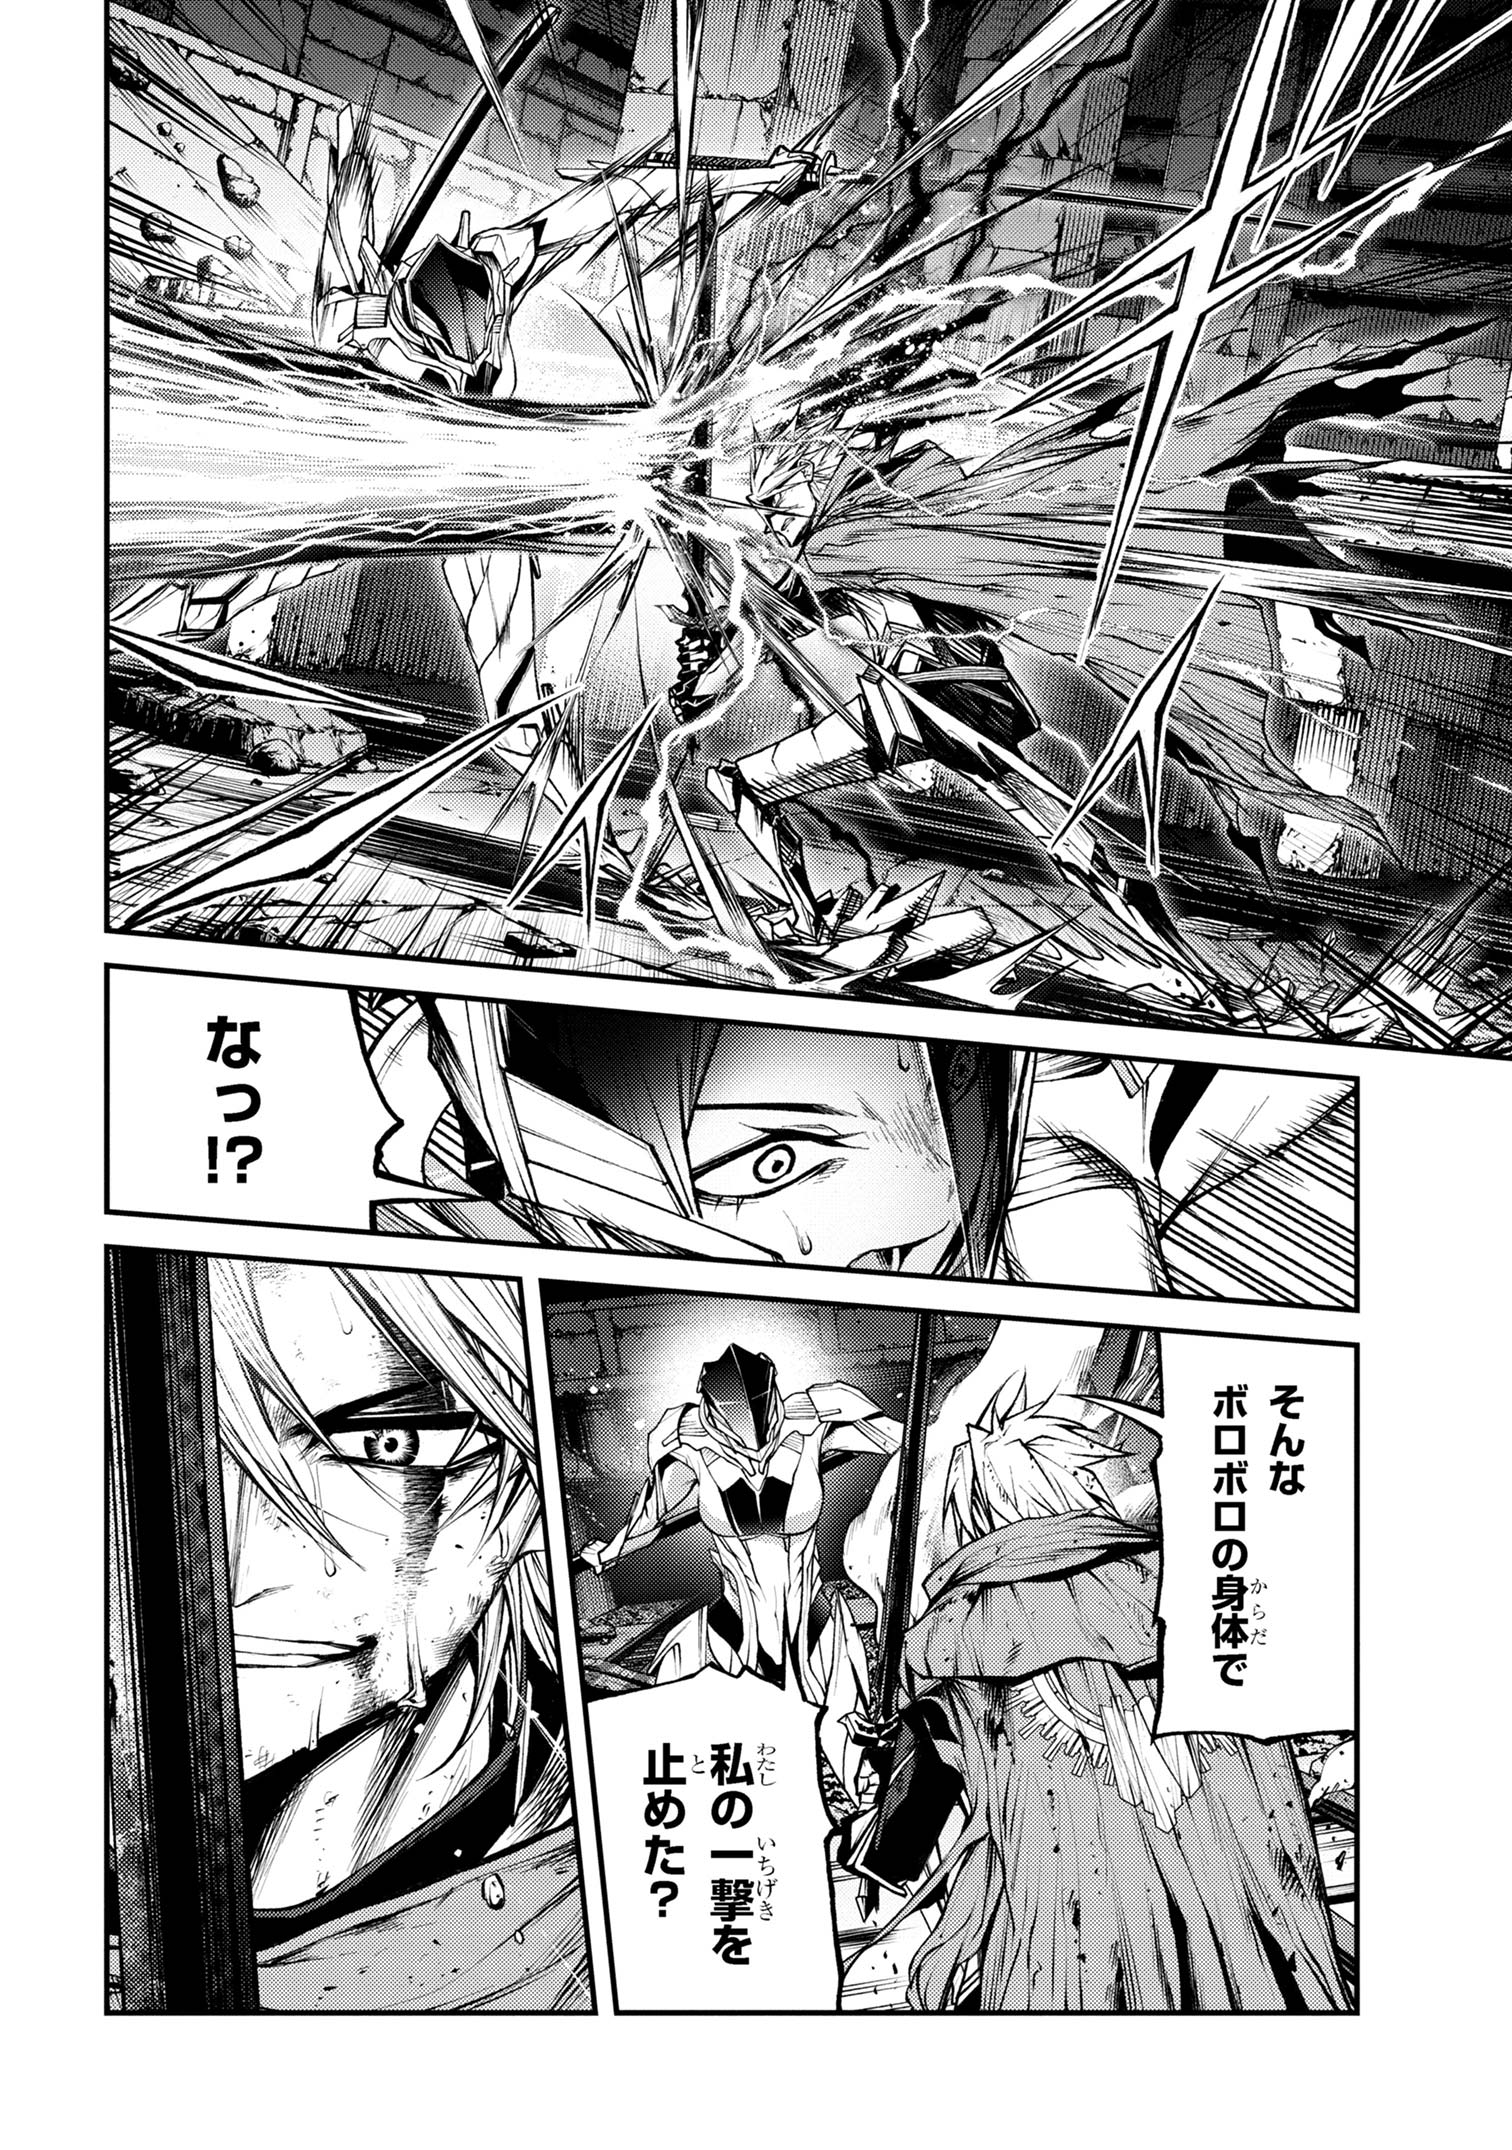 Maou 2099 - Chapter 12.2 - Page 4